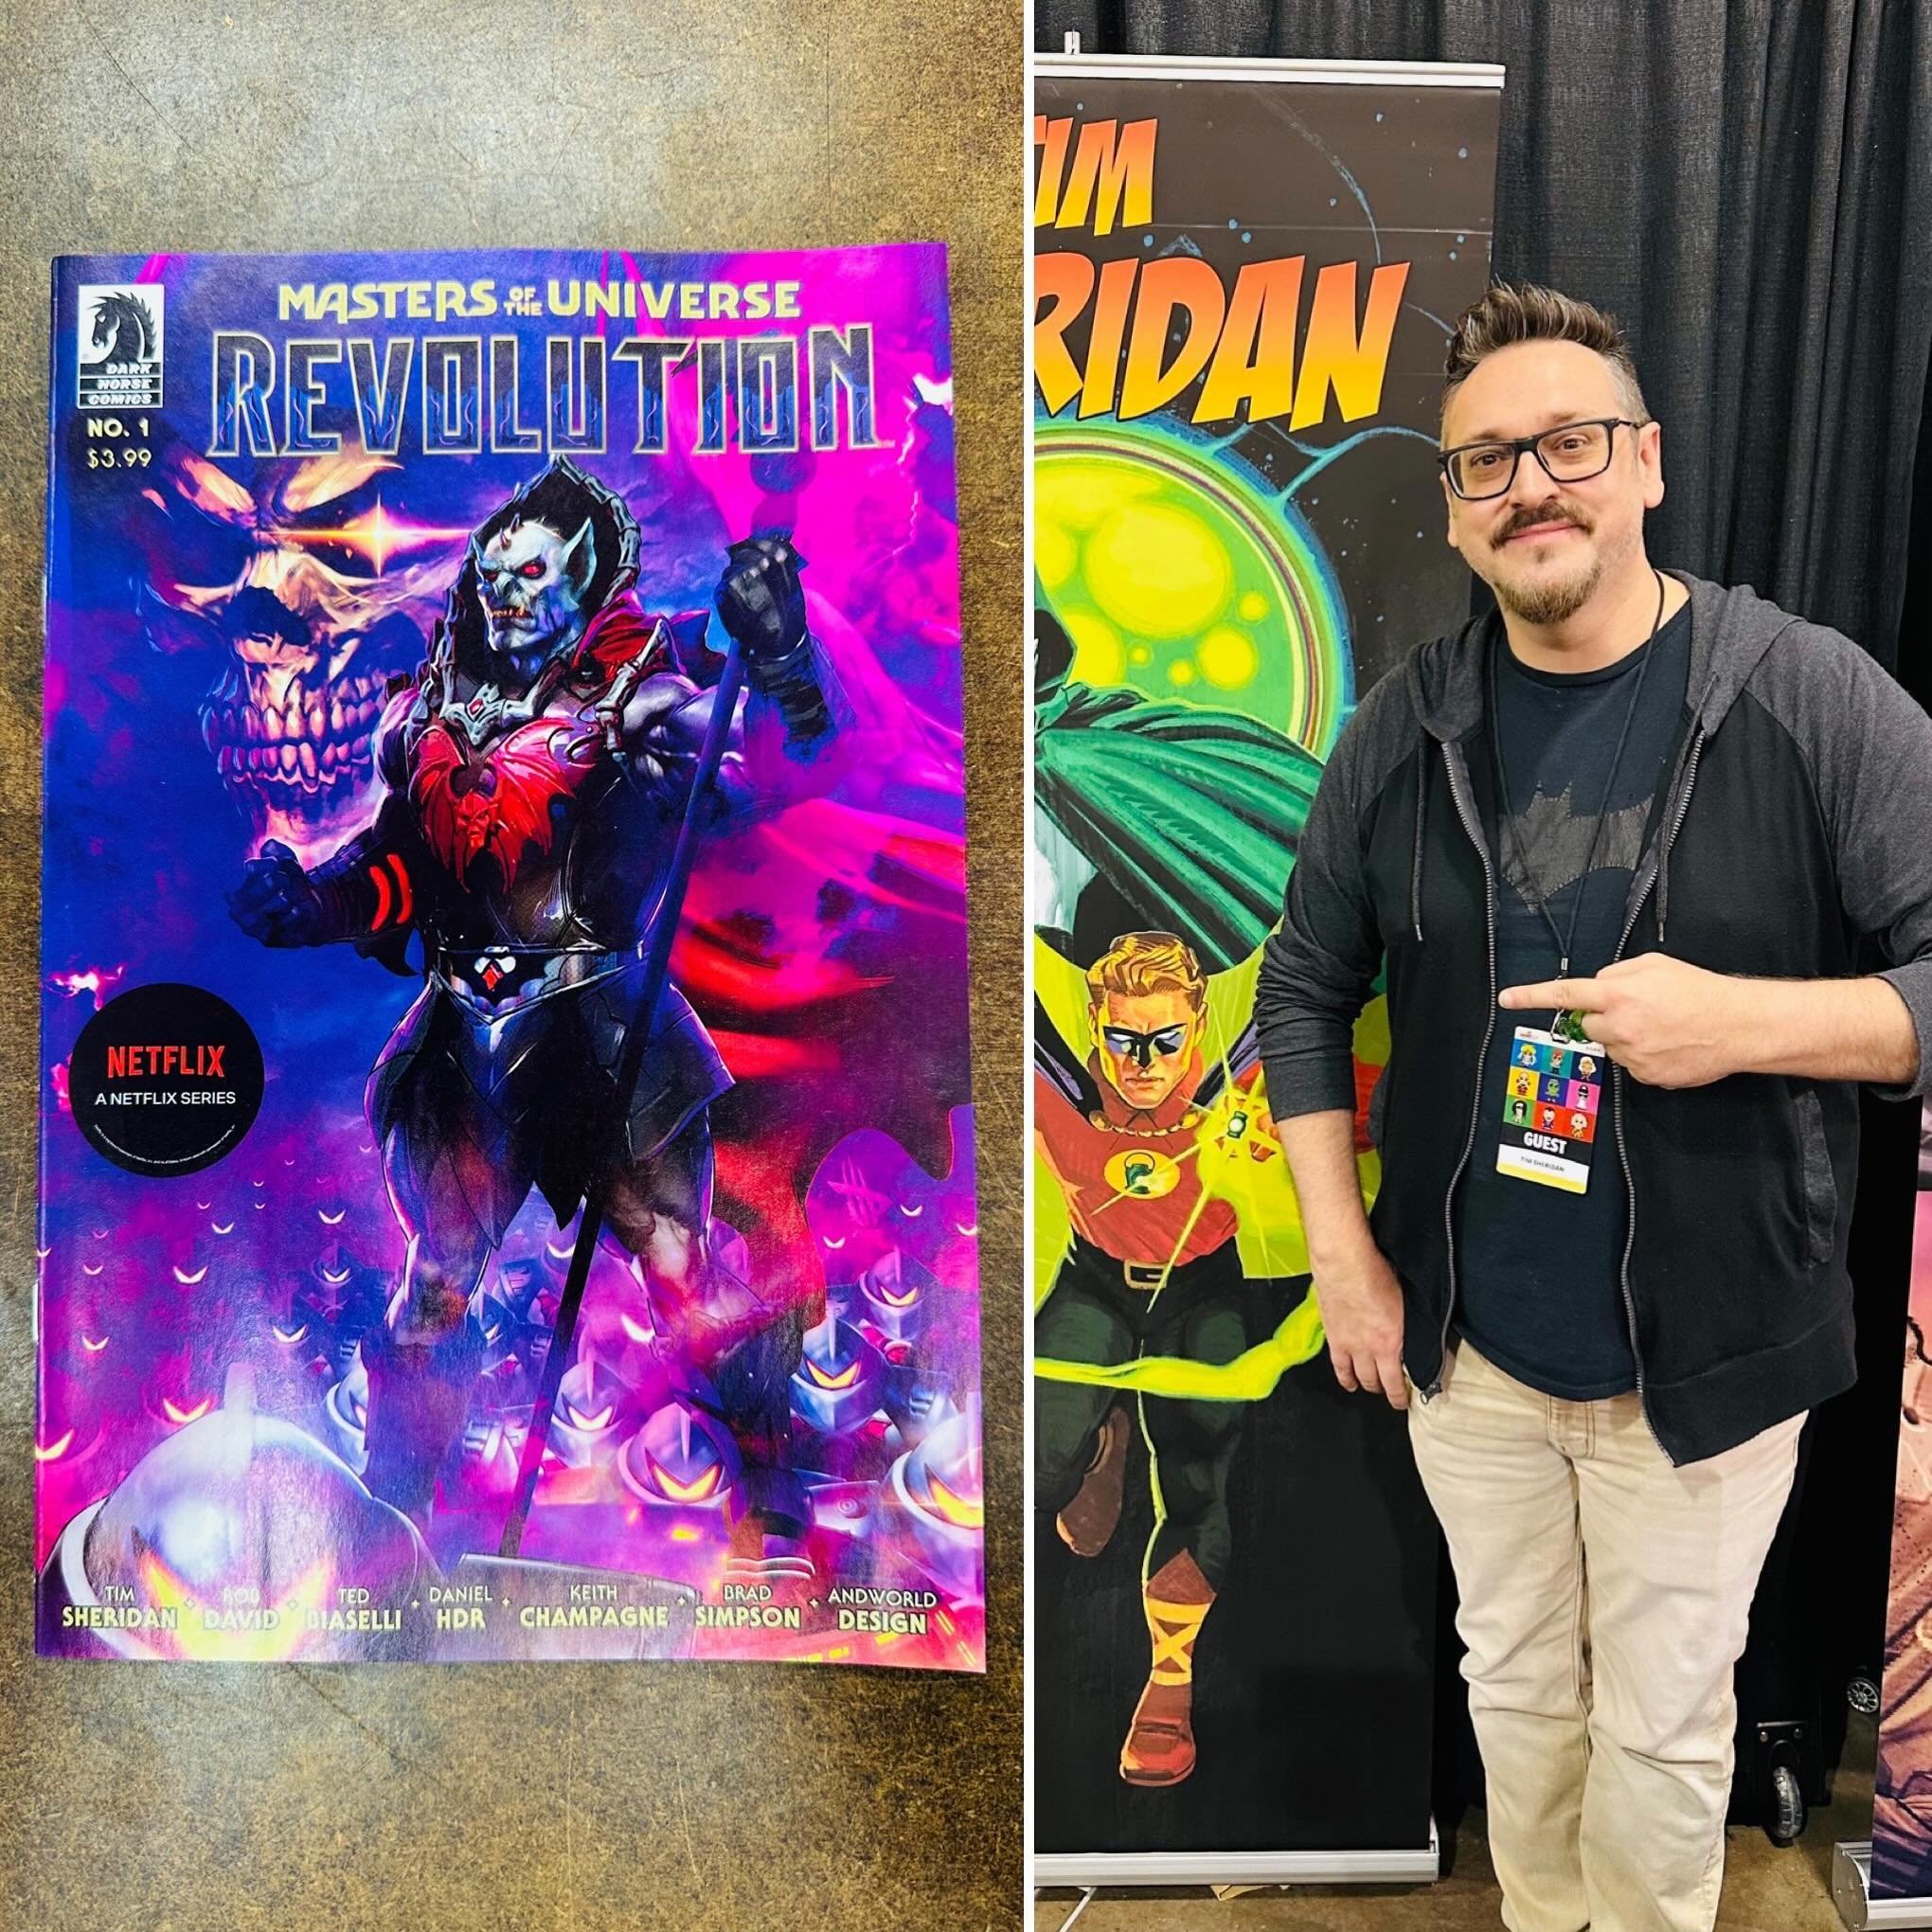 Oh, damn, look at this! Another @ilovetimsheridan #MOTU book! Revolution looks amazing. And if you missed it, listen to my interview with Sheridan. (Find it on our site. Follow link in bio) @danielhdr @thepretentiouskeithchampagne @20eyesbrad @andwor